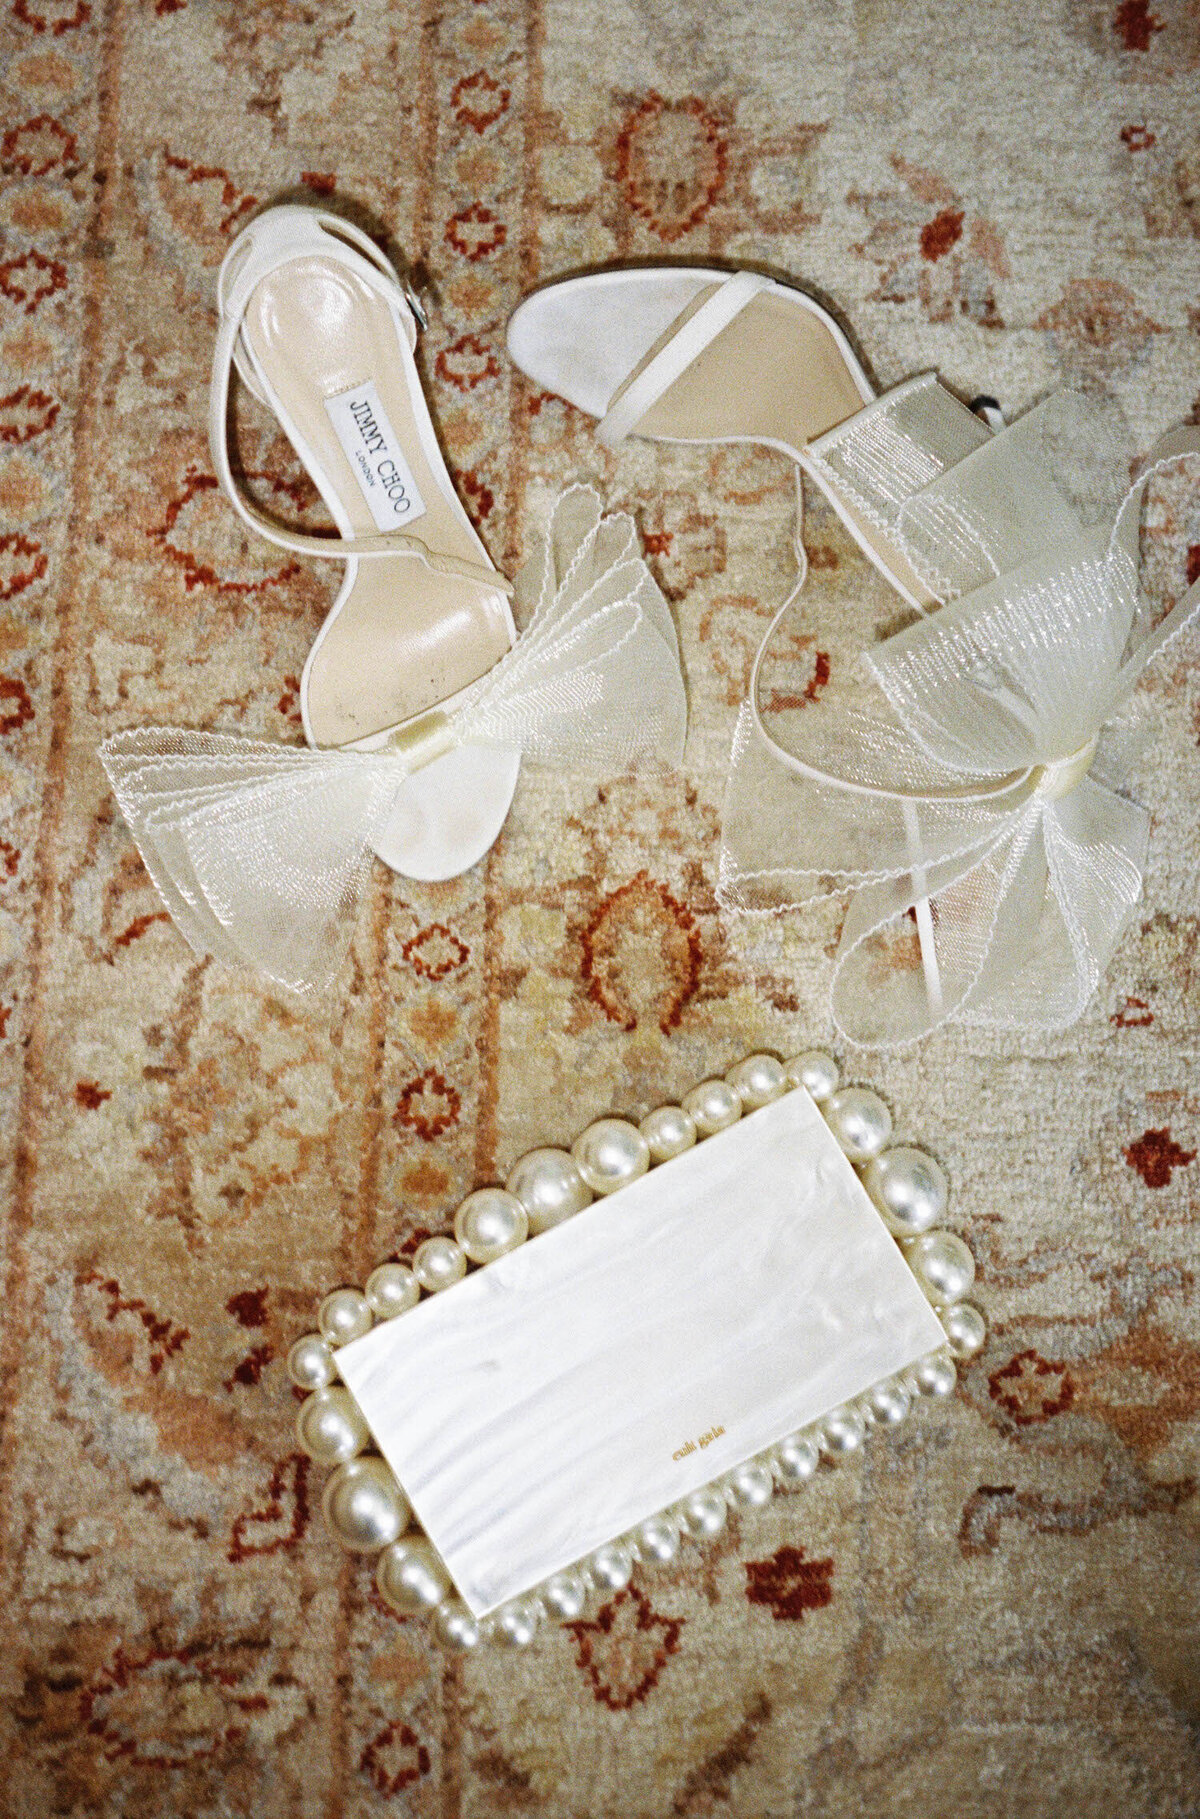 Flora_And_Grace_Italy_Analog_35mm_Fim_Editorial_Wedding_Photographer-6